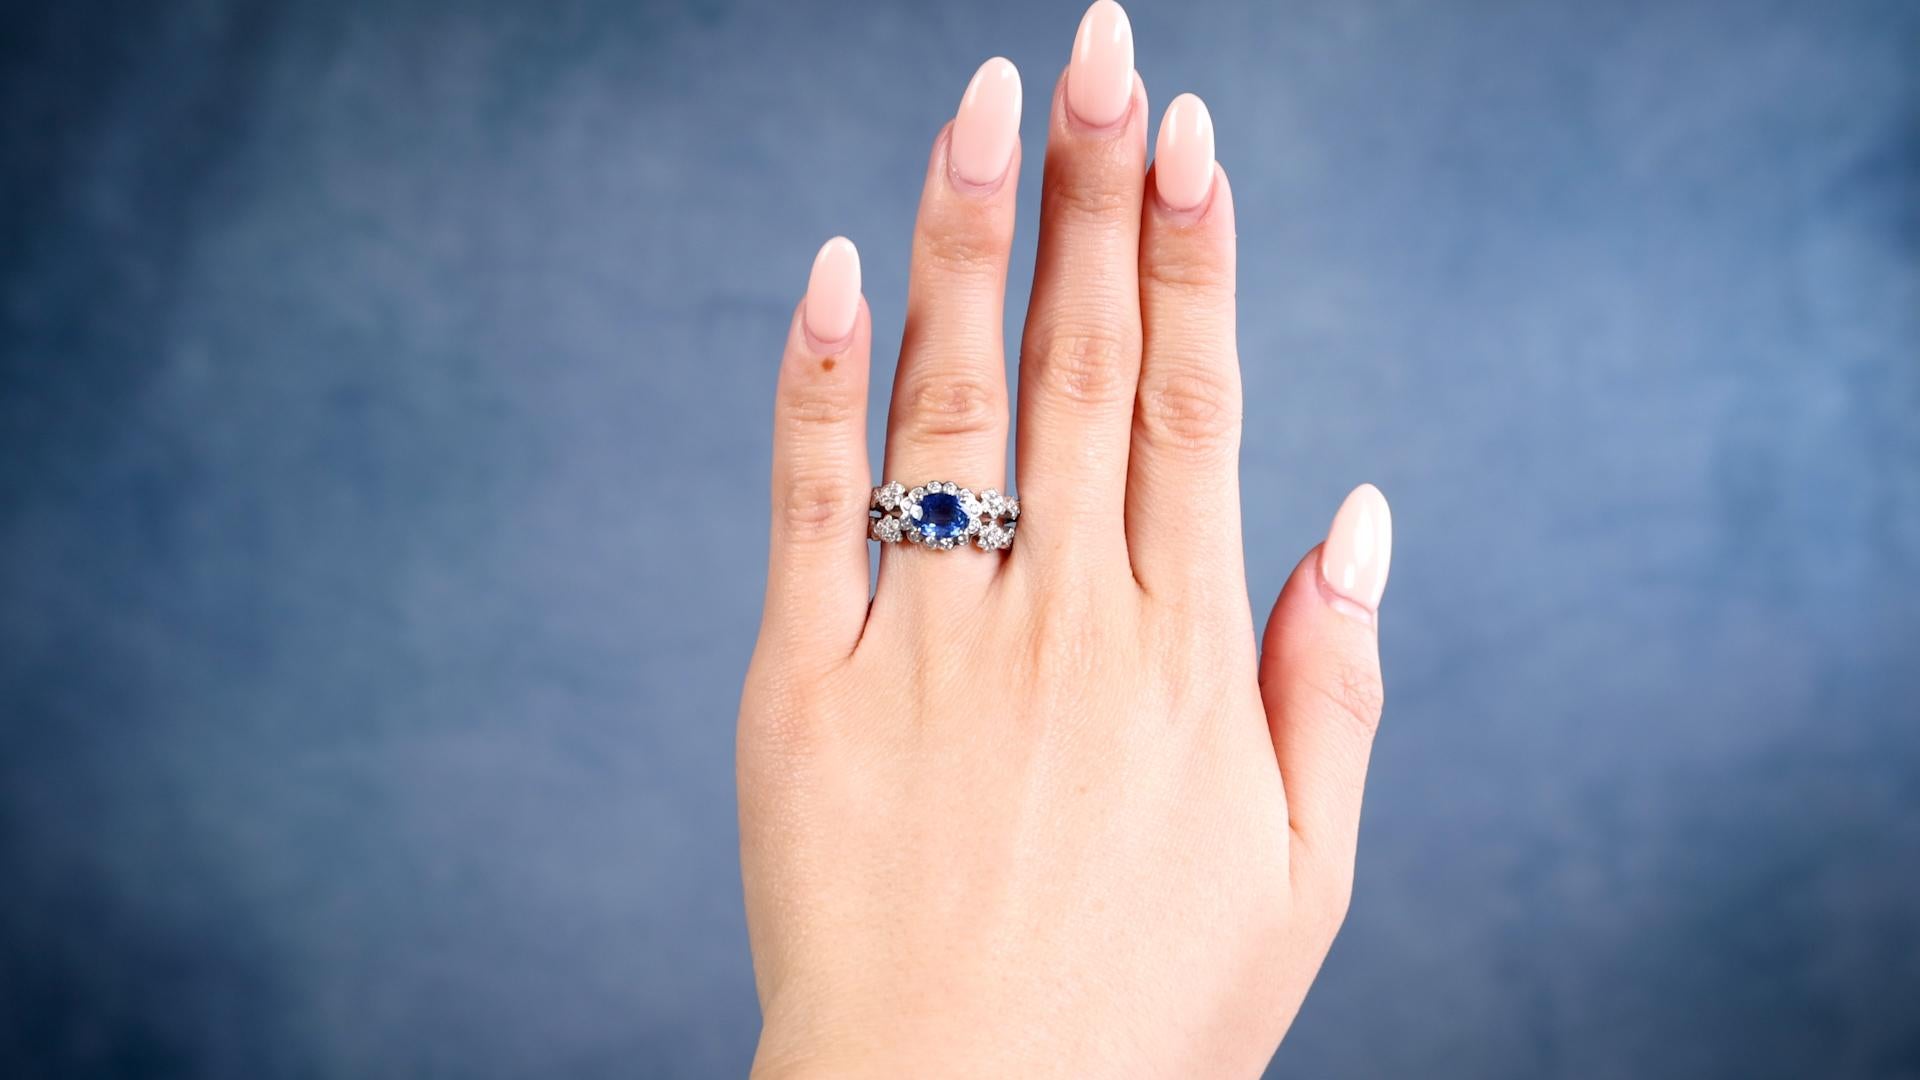 One 1.59 Carat Sapphire and Diamond Platinum Ring. Featuring one oval mixed cut sapphire of 1.59 carats. Accented by 72 round brilliant cut diamonds with a total weight of 0.65 carat graded colorless, VS-SI clarity. Crafted in platinum with purity